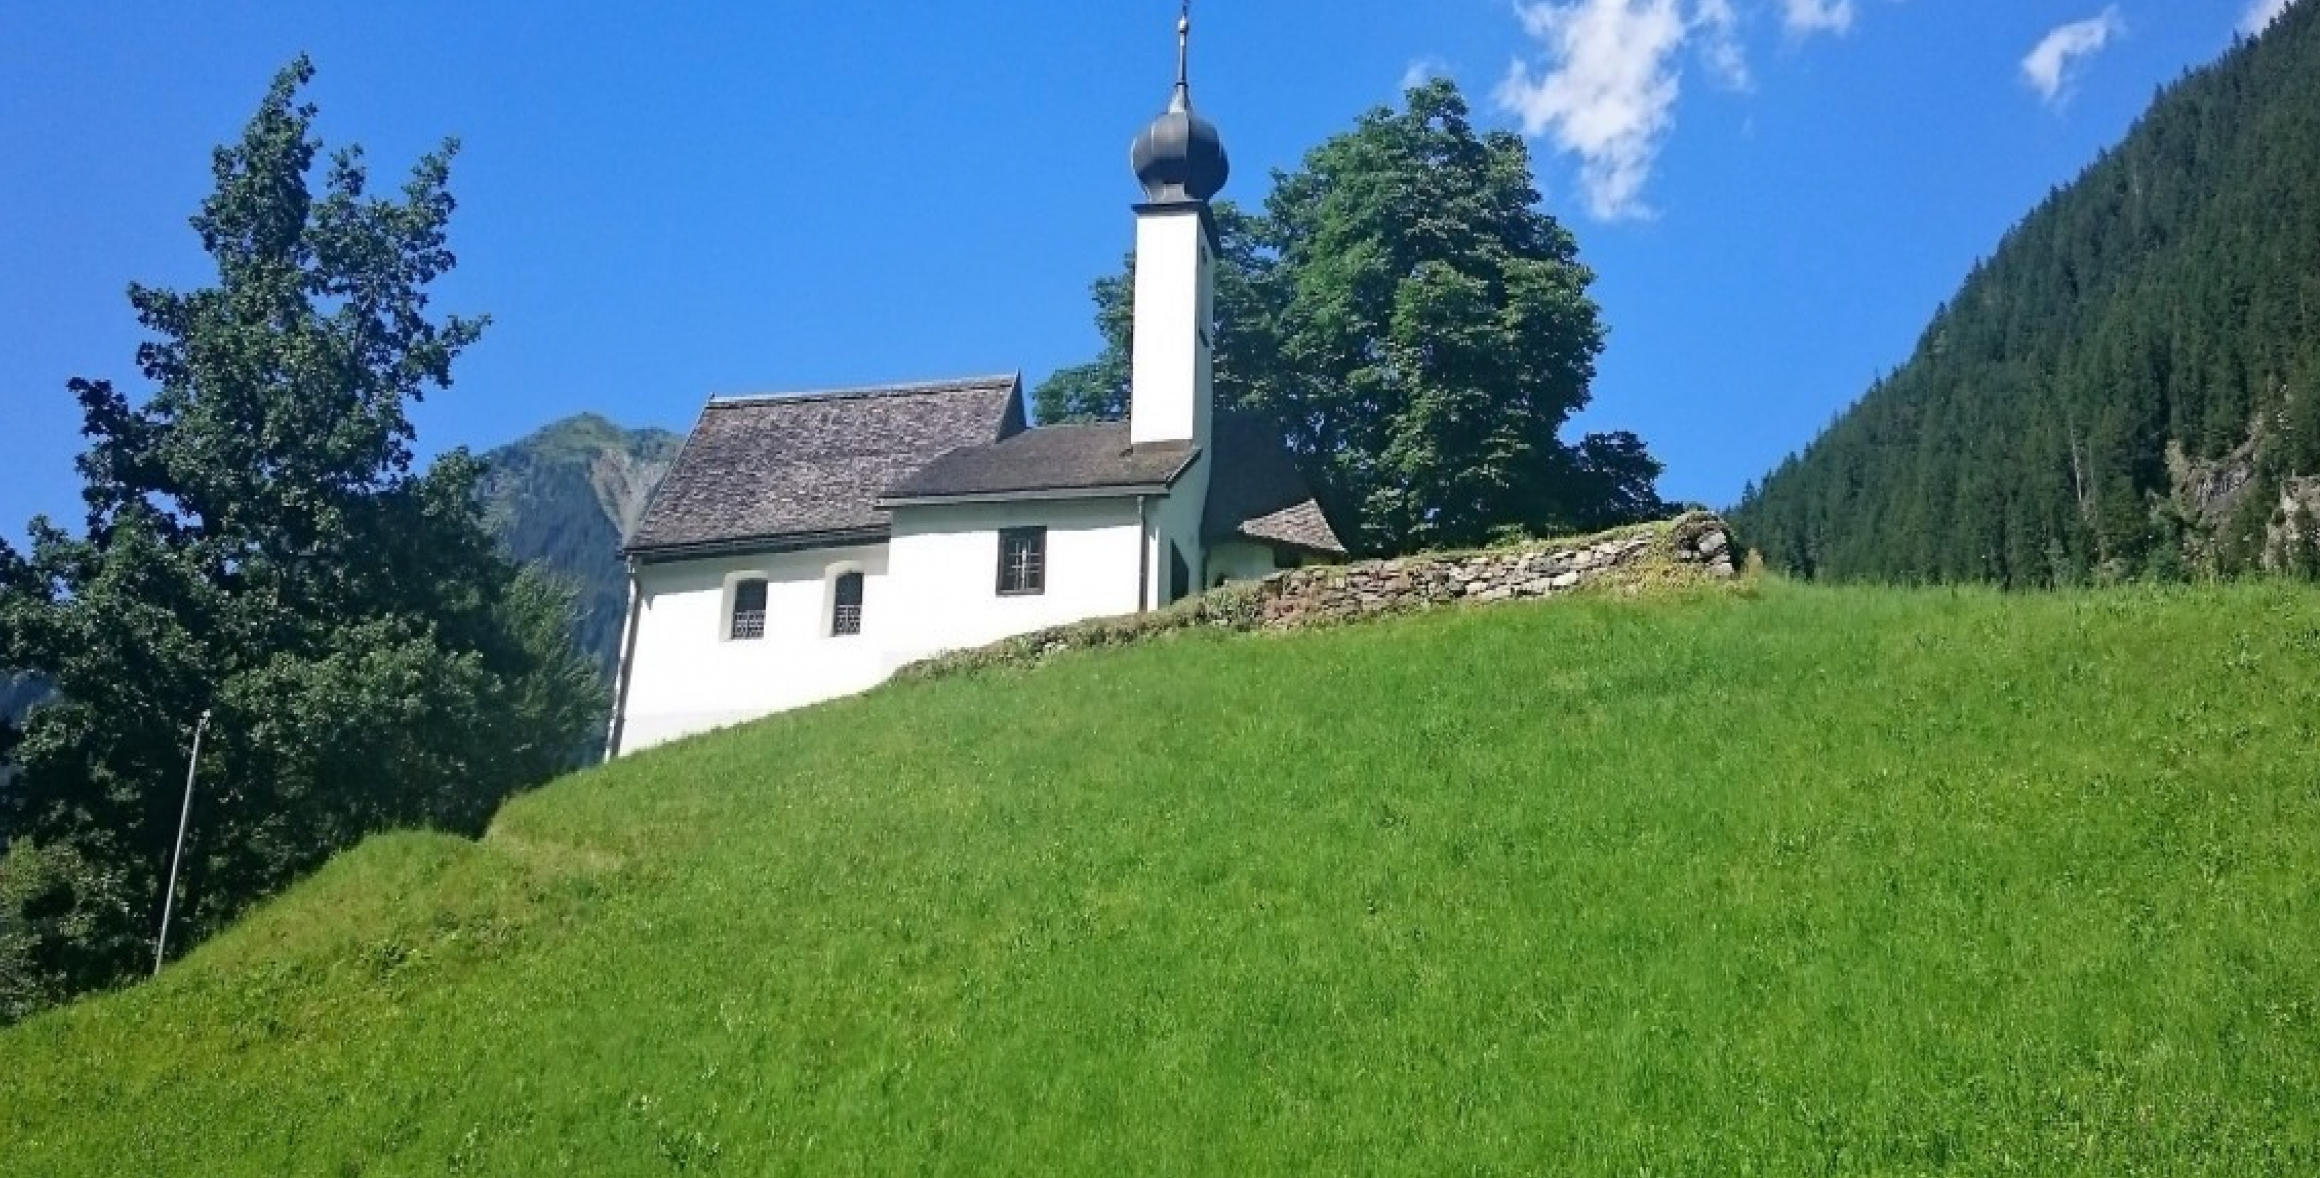 gallery/church_hilltop_building_alps_countryside_scenery_panoramic_mountain-491953